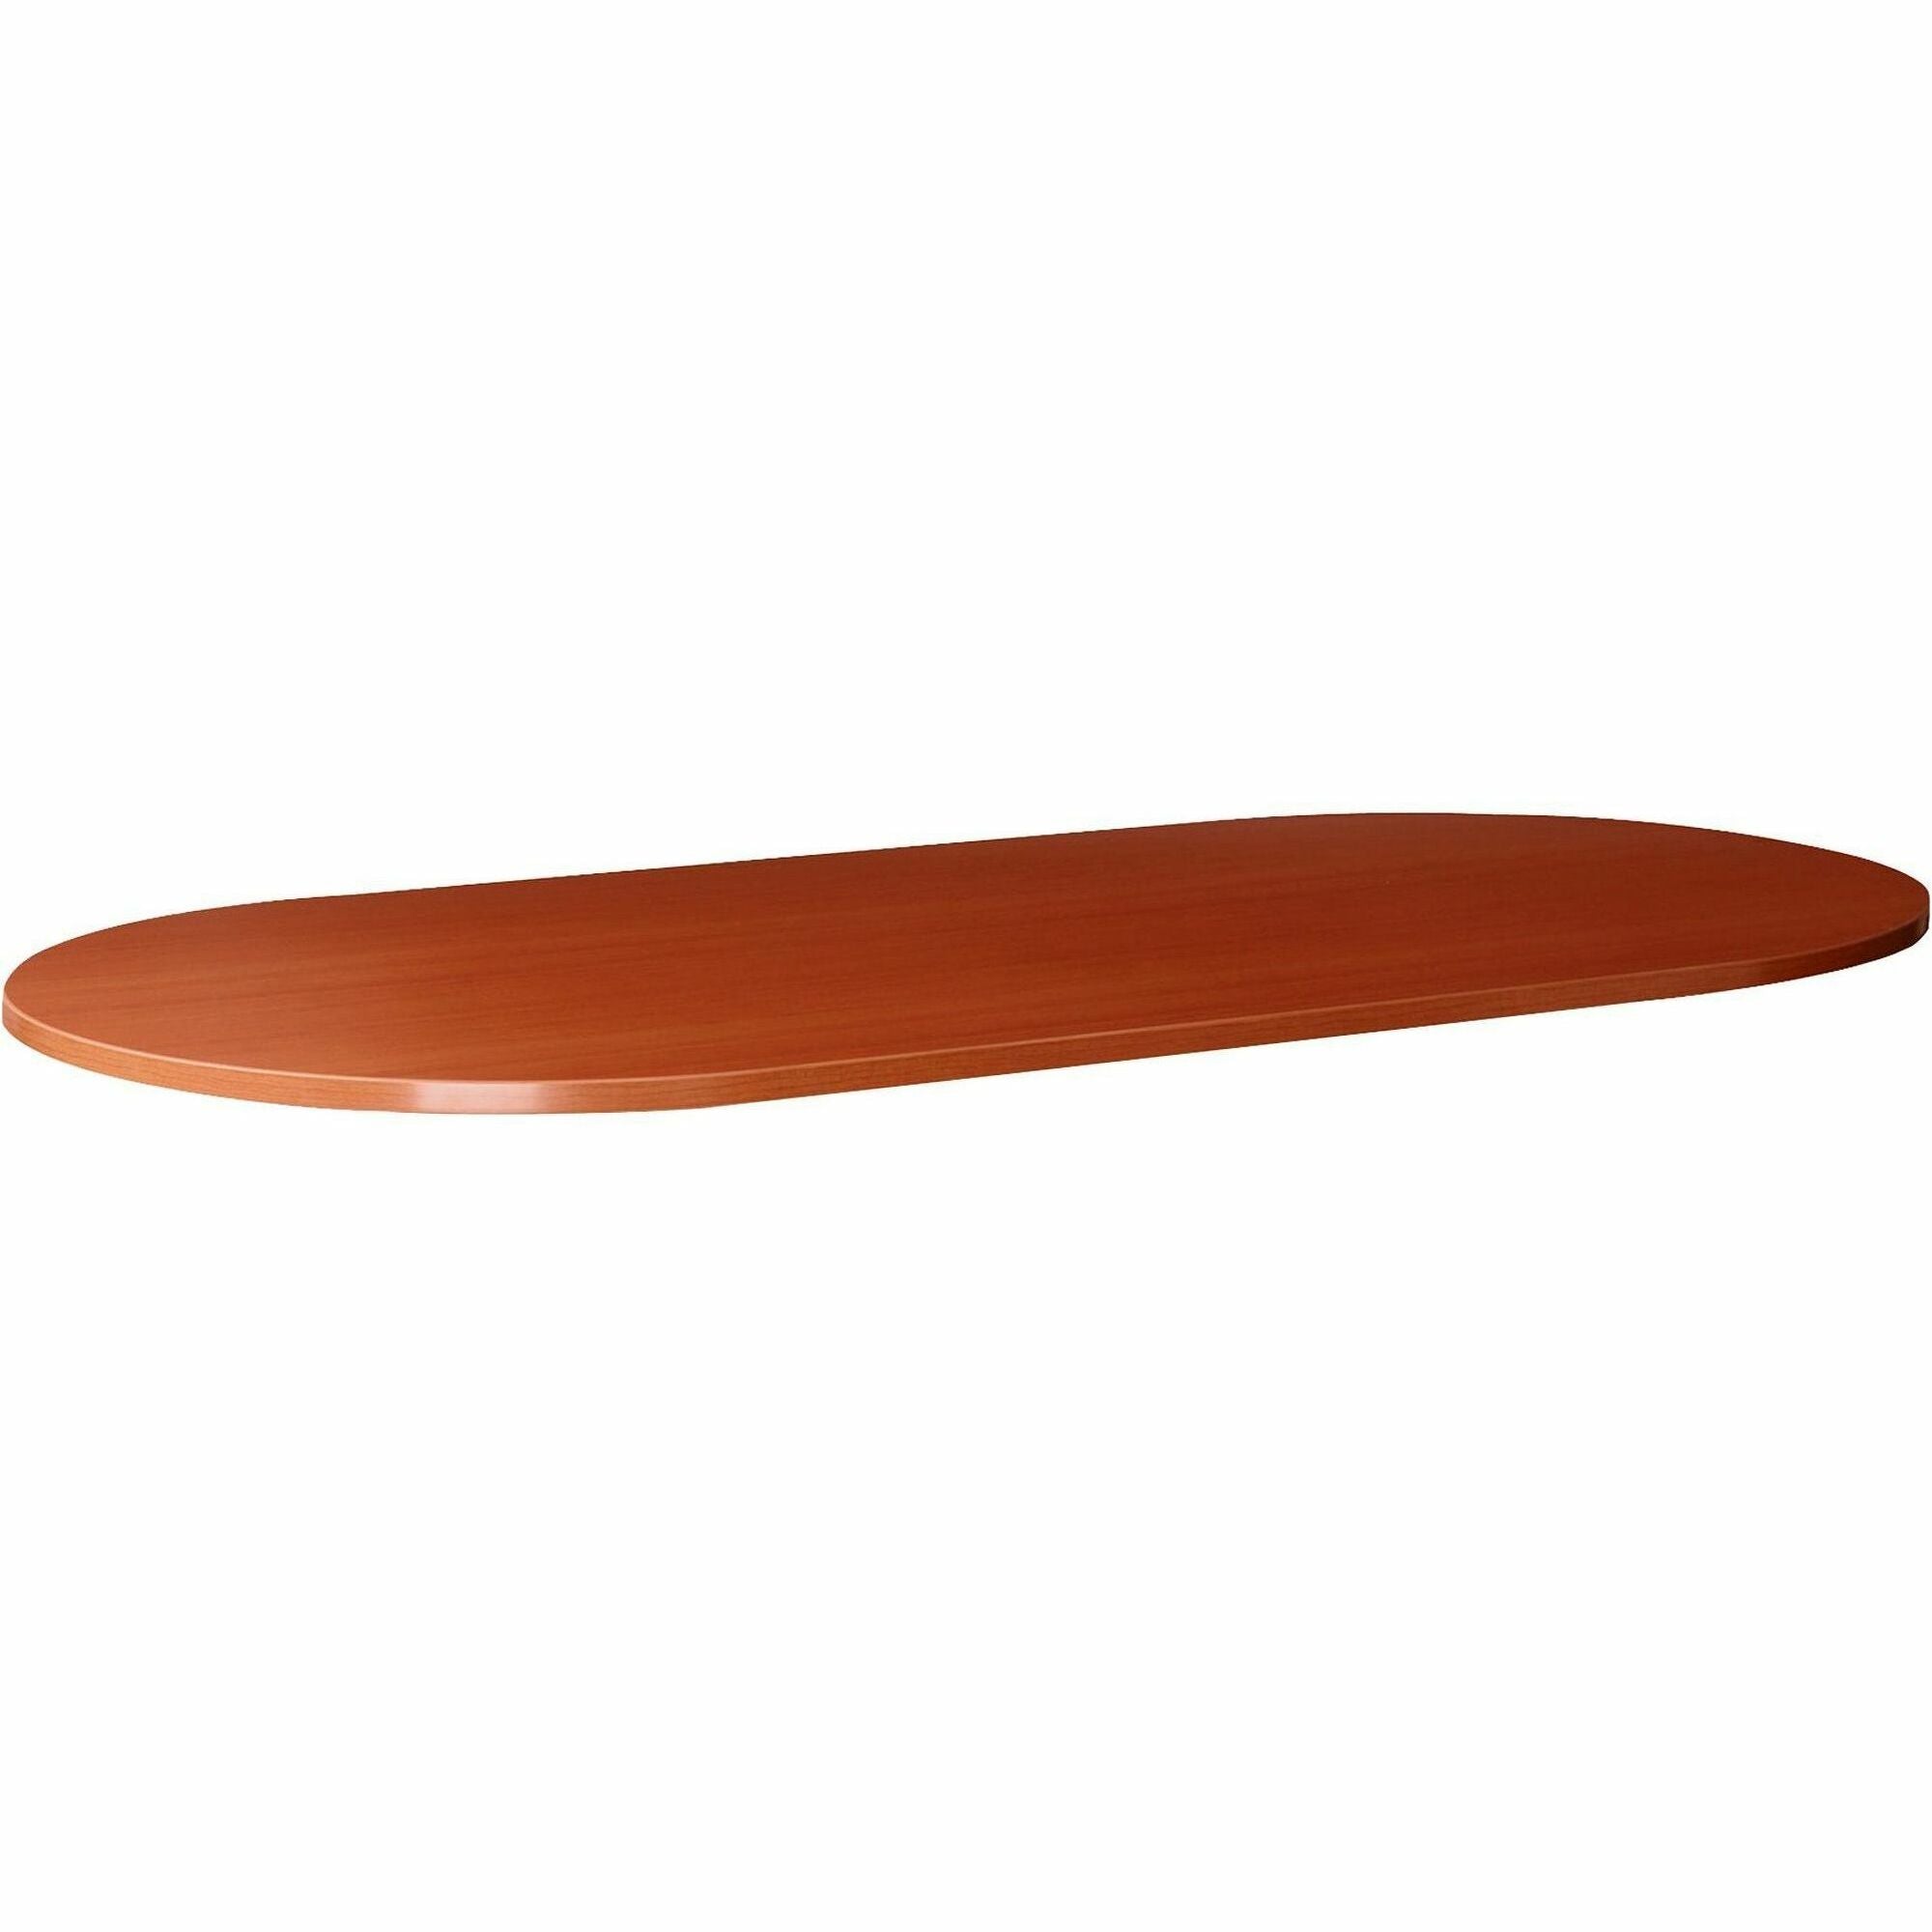 Lorell Essentials Oval Conference Tabletop - 94.5" x 47.3" x 1.3" x 1" - Finish: Cherry, Laminate - 